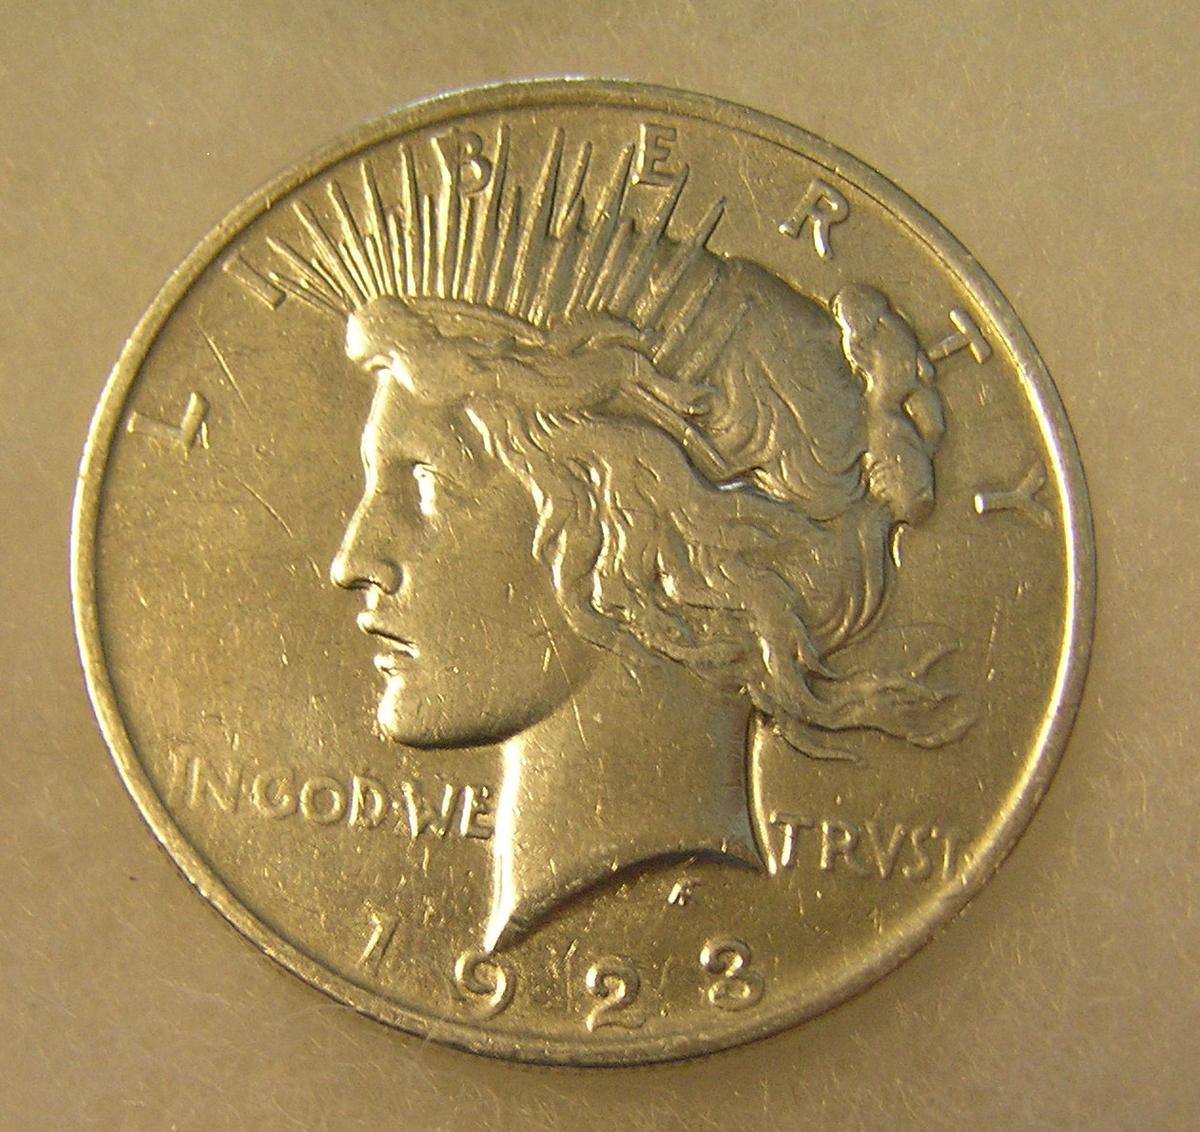 1923 Lady Liberty Peace silver dollar in fine condition